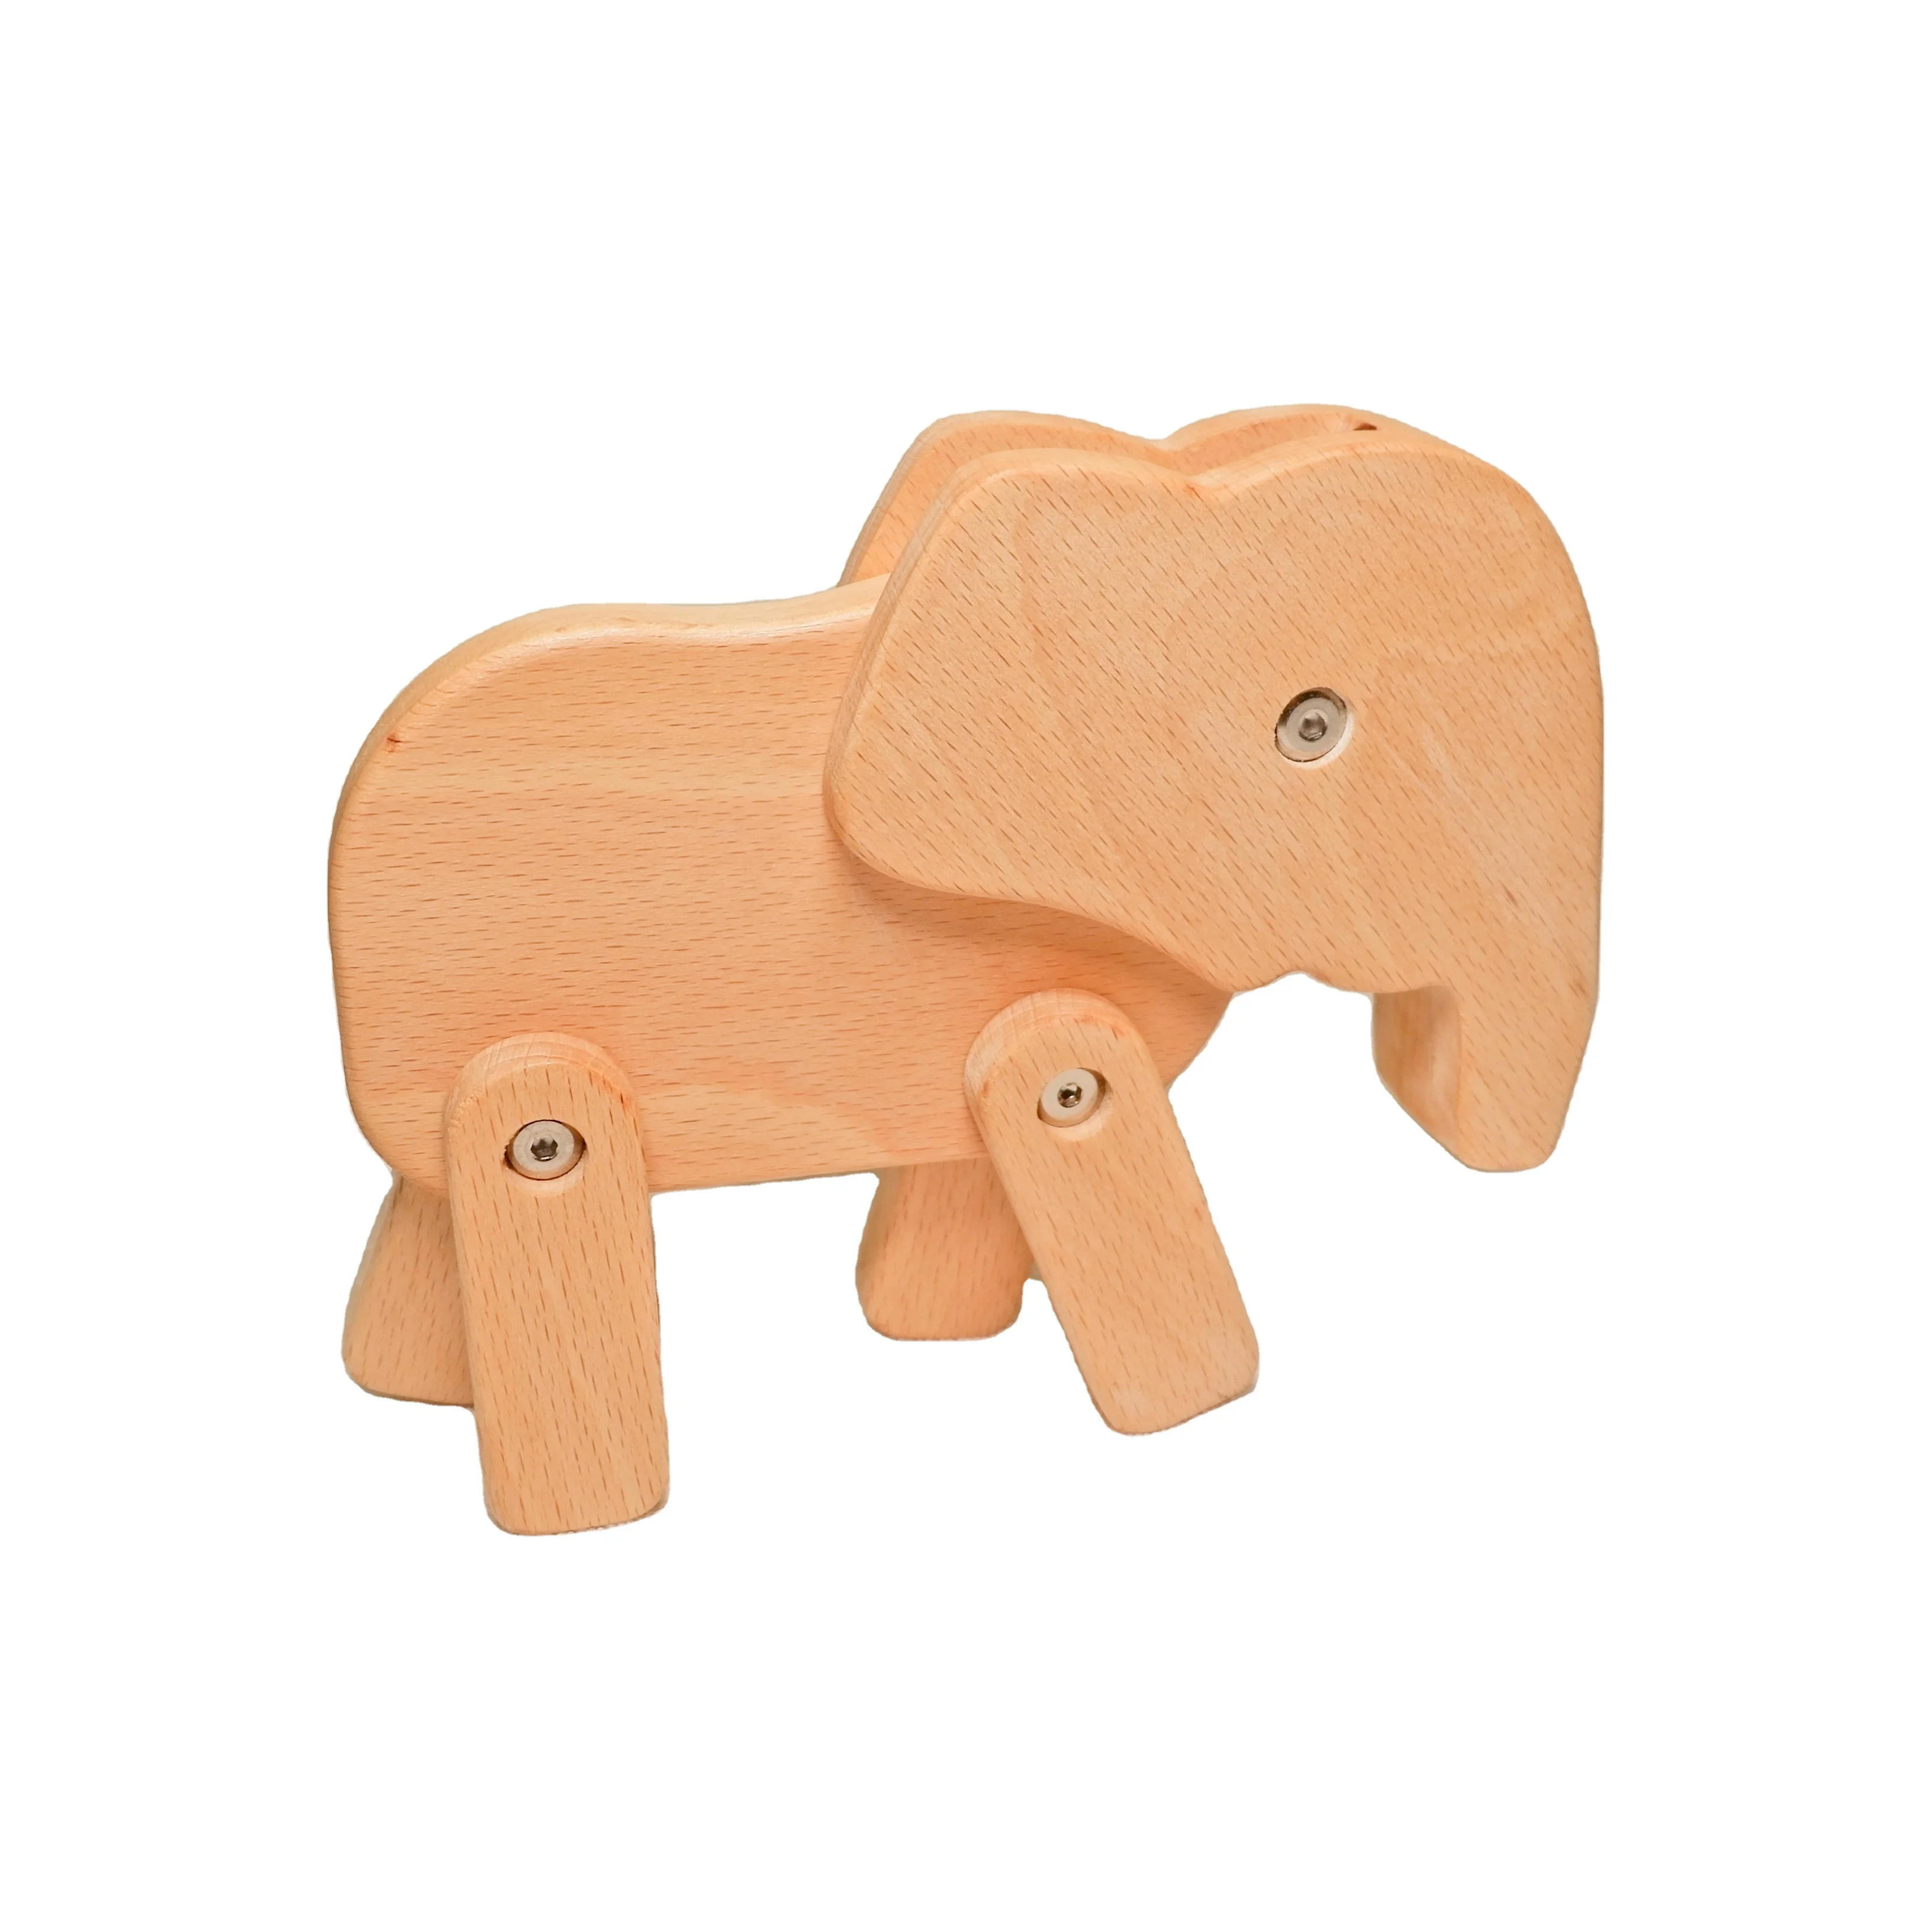 Animal Wood Crafts Creative Wooden Decoration Elephant Home Decor Movable  Joints Educational Wooden Toys - Buy Wood Decoration,Wooden Animal Crafts,Animal  Wood Crafts Product on 